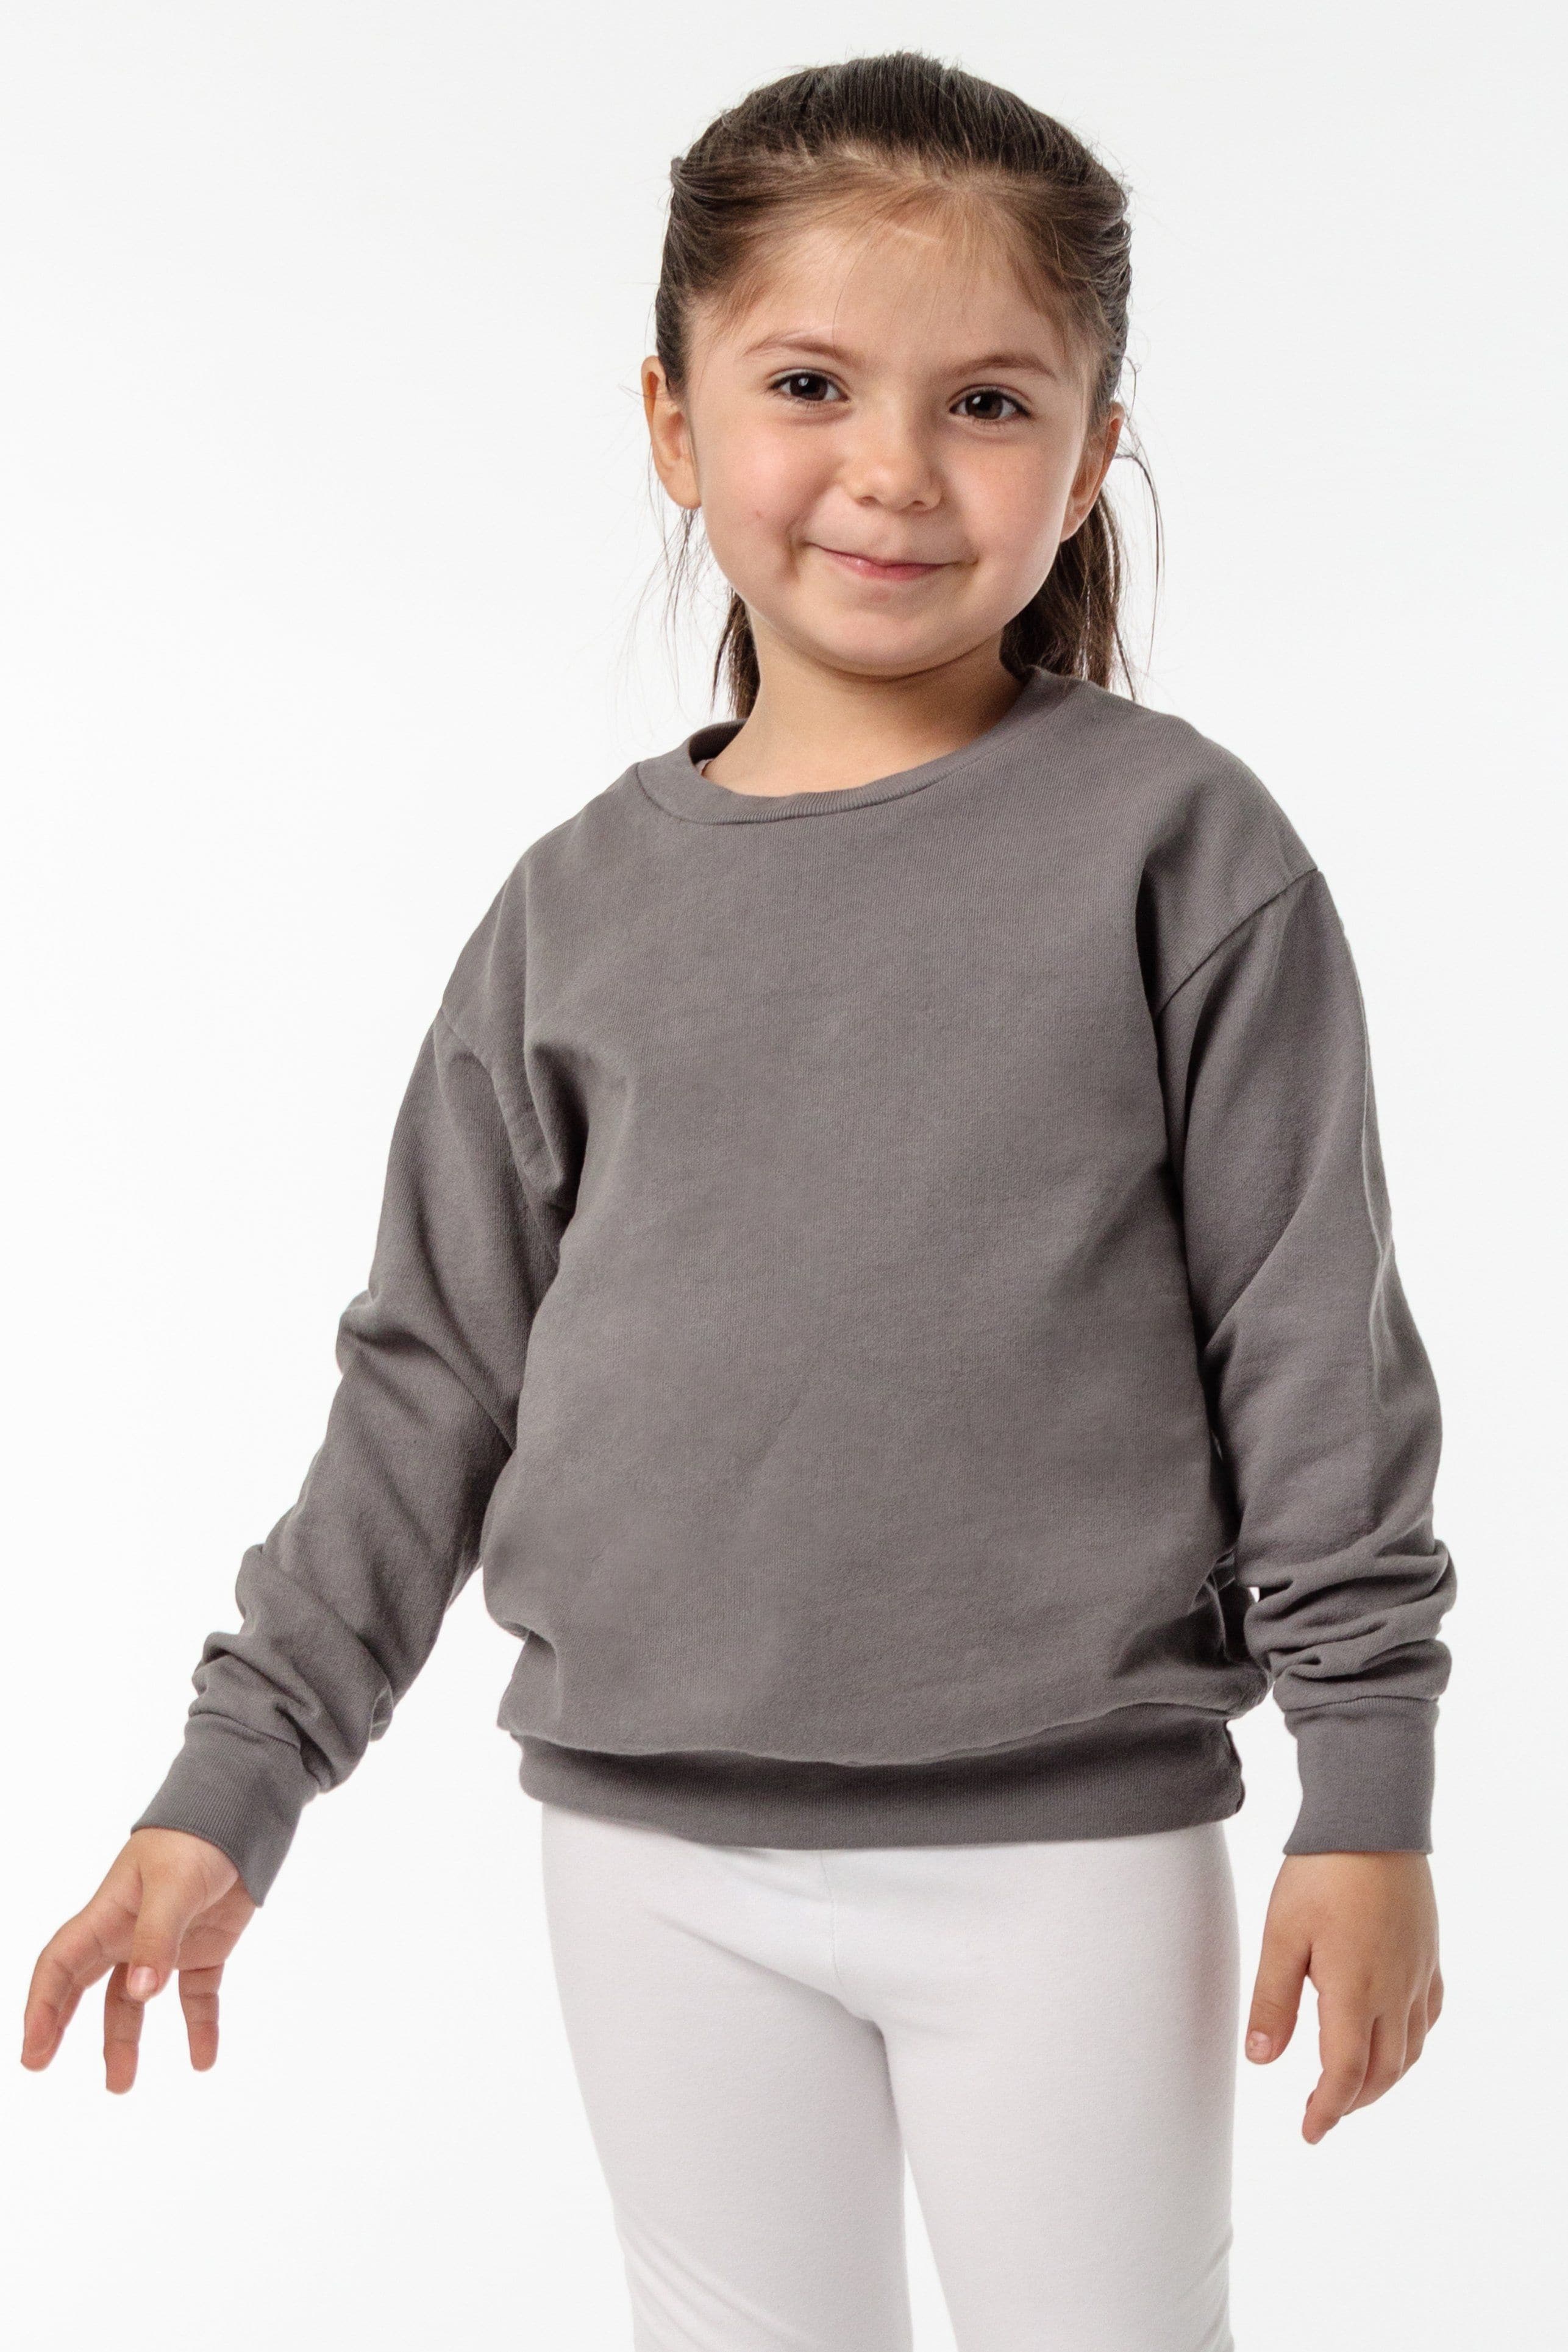 MWT107GD - Toddler Mid-Weight Pullover – Los Angeles Apparel